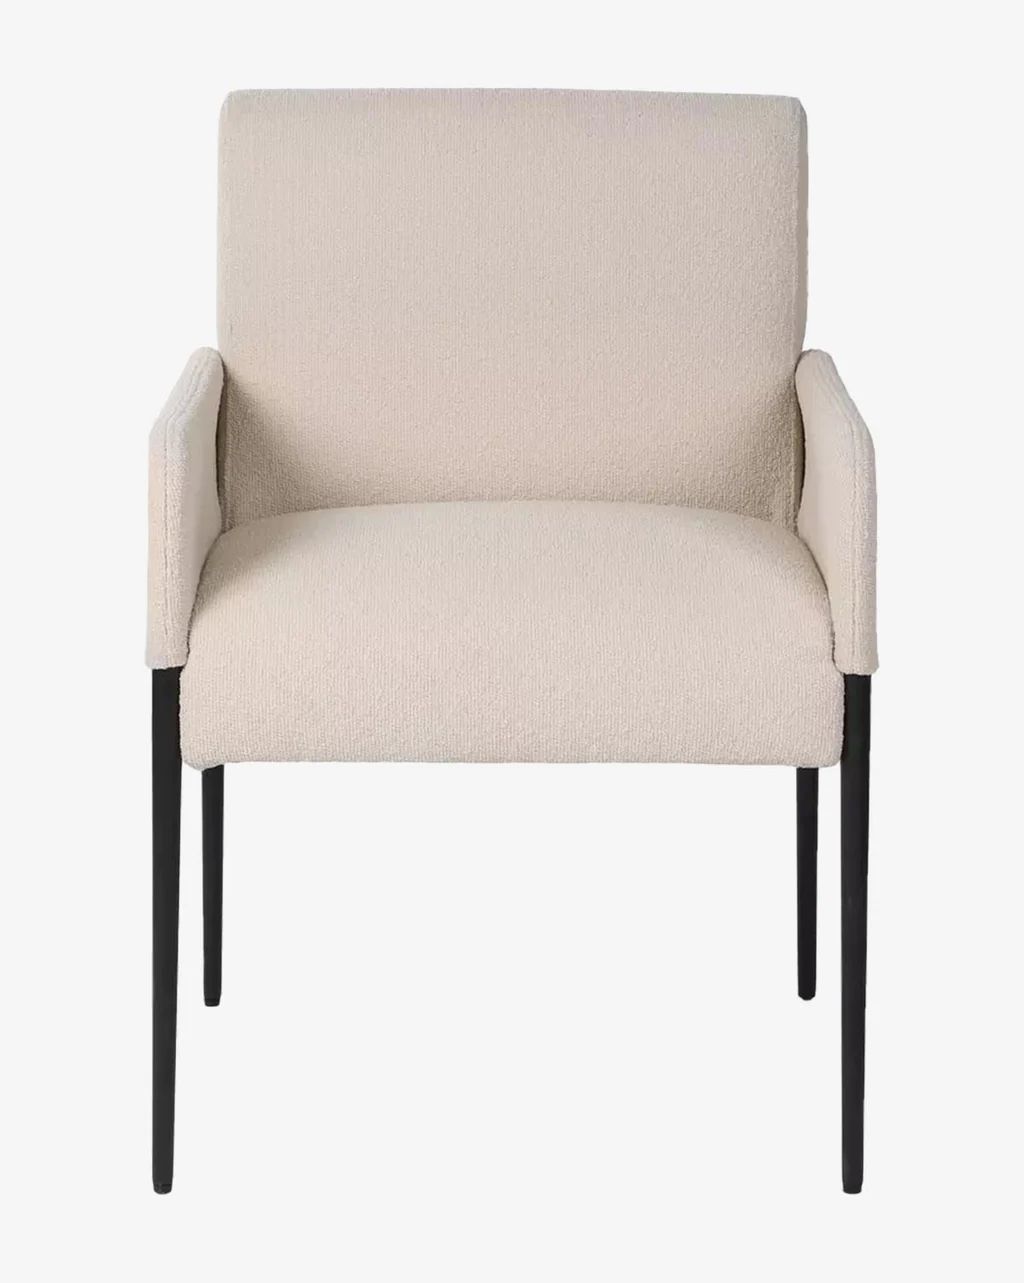 Rory Armchair | McGee & Co.